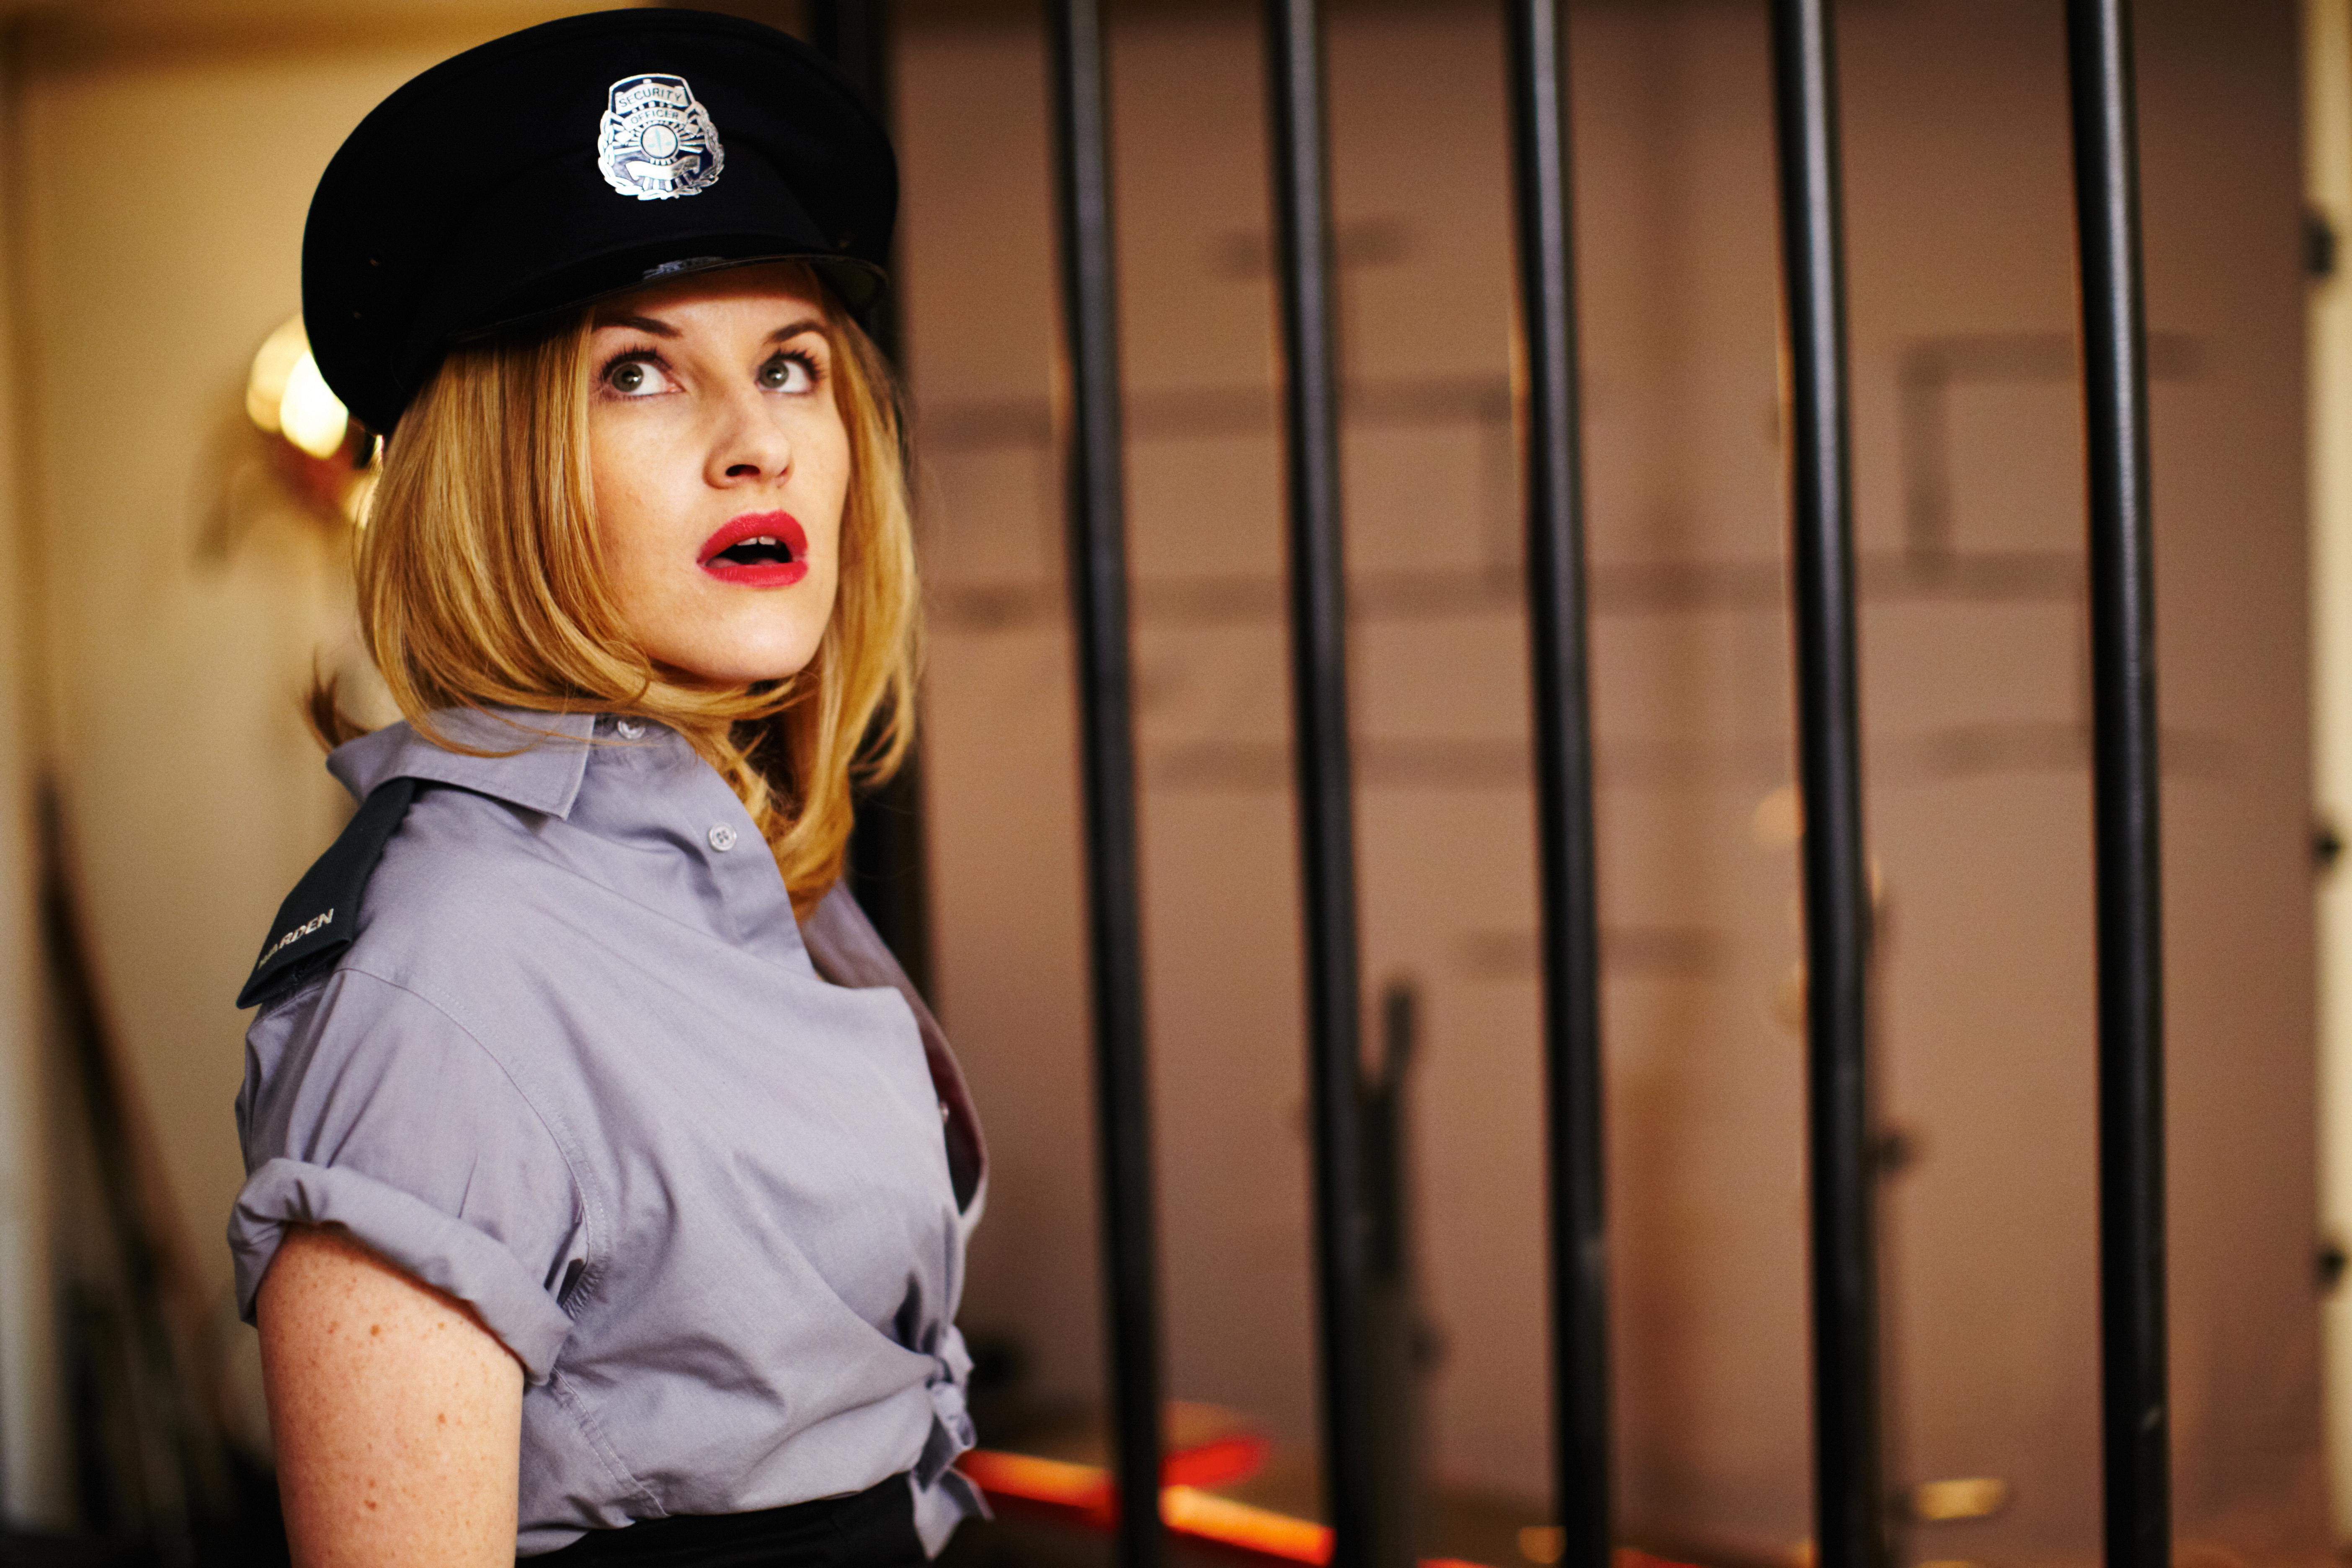 Evie (Kate Mulvany) in a scene from THE LITTLE DEATH, directed by Josh Lawson In cinemas September 25, 2014 An Entertainment One Films release For more information contact rbraye@entonegroup.com